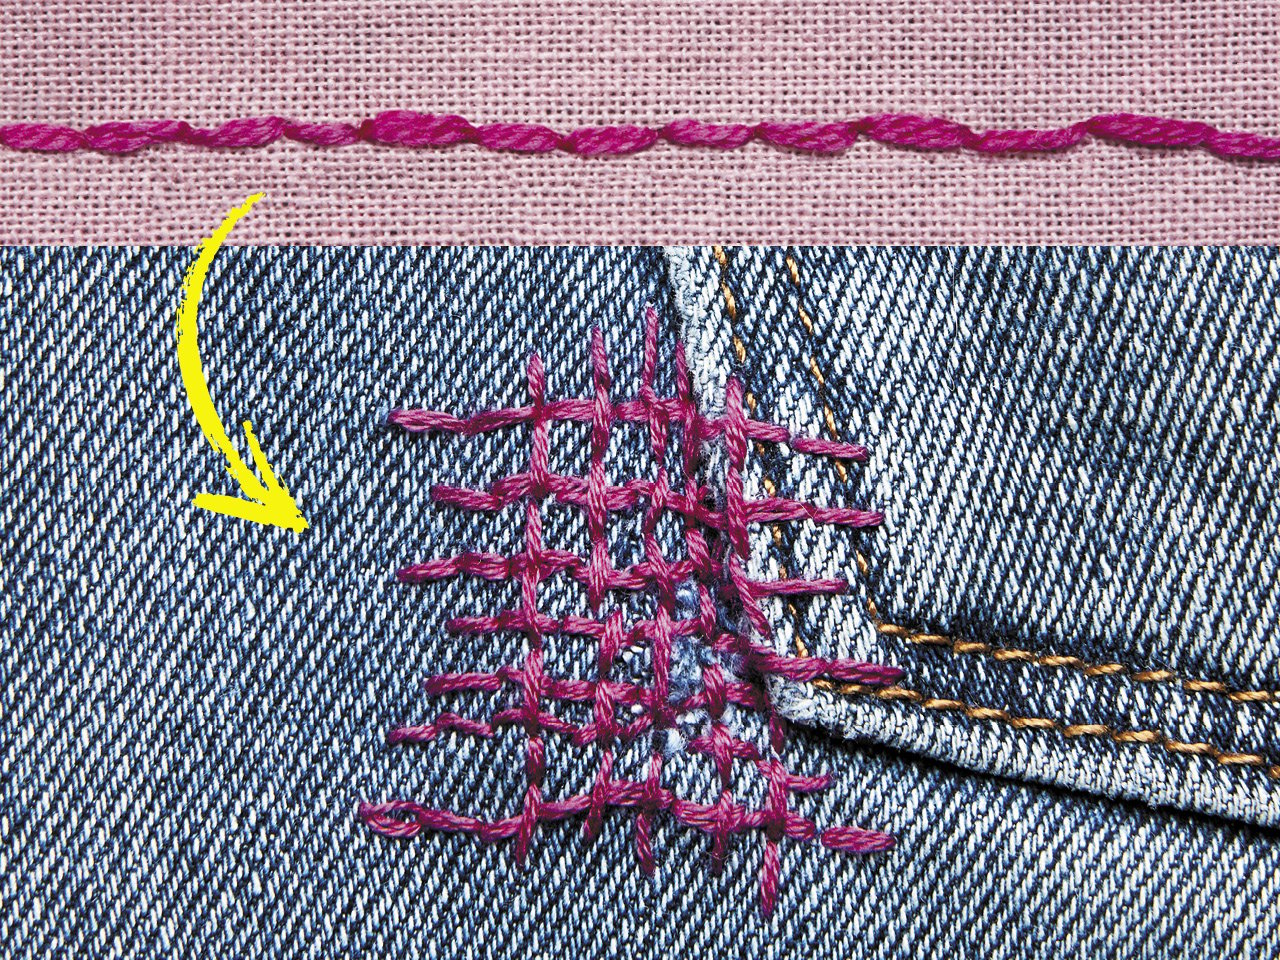 A demonstration of the back stitch with purple thread on denim